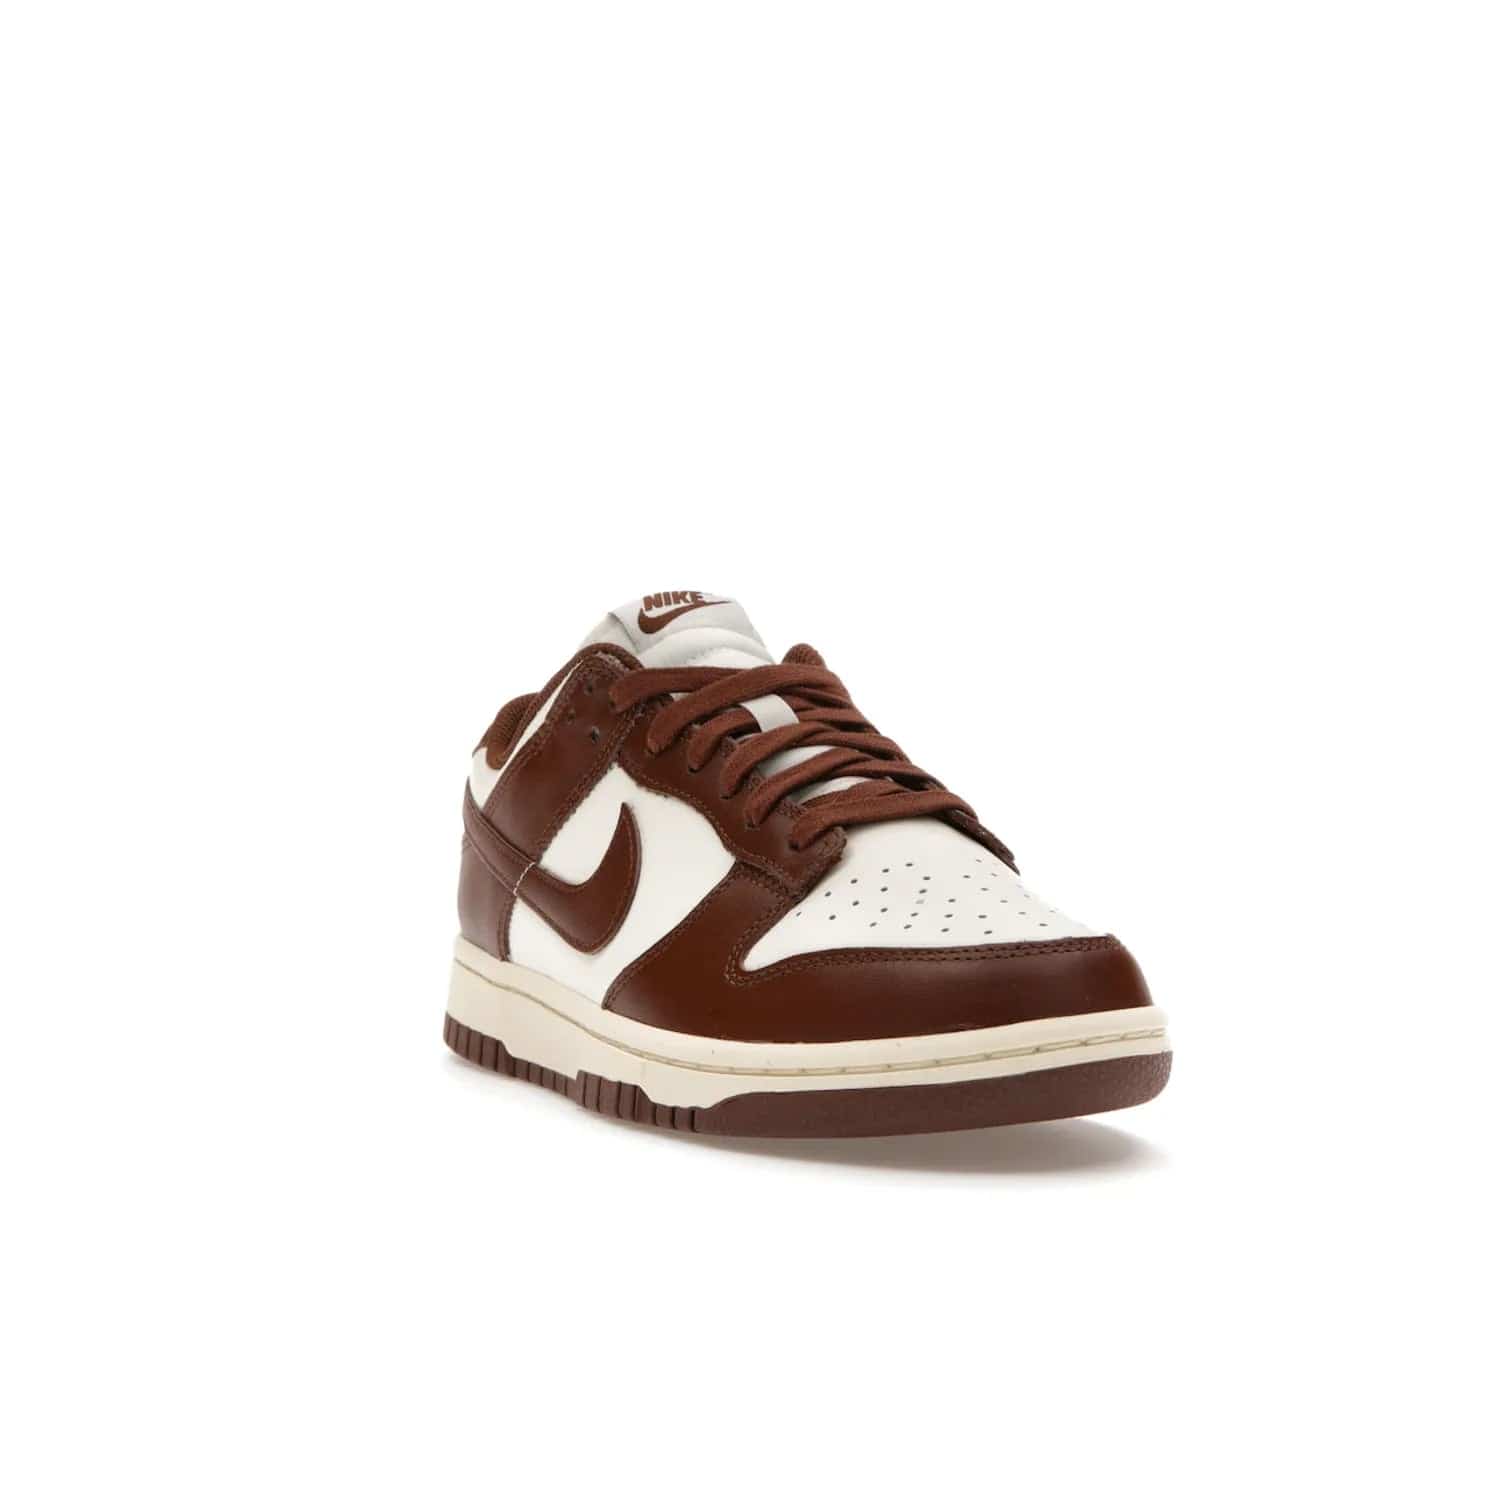 Nike Dunk Low Cacao Wow (Women's) - Image 7 - Only at www.BallersClubKickz.com - Revised
Get the Nike Dunk Low Cacao Wow and make a statement! Plush leather and a cool Cacao Wow finish bring together a unique mix of comfort and fashion that will turn heads. Boosted with a Coconut Milk hue. Shop today.